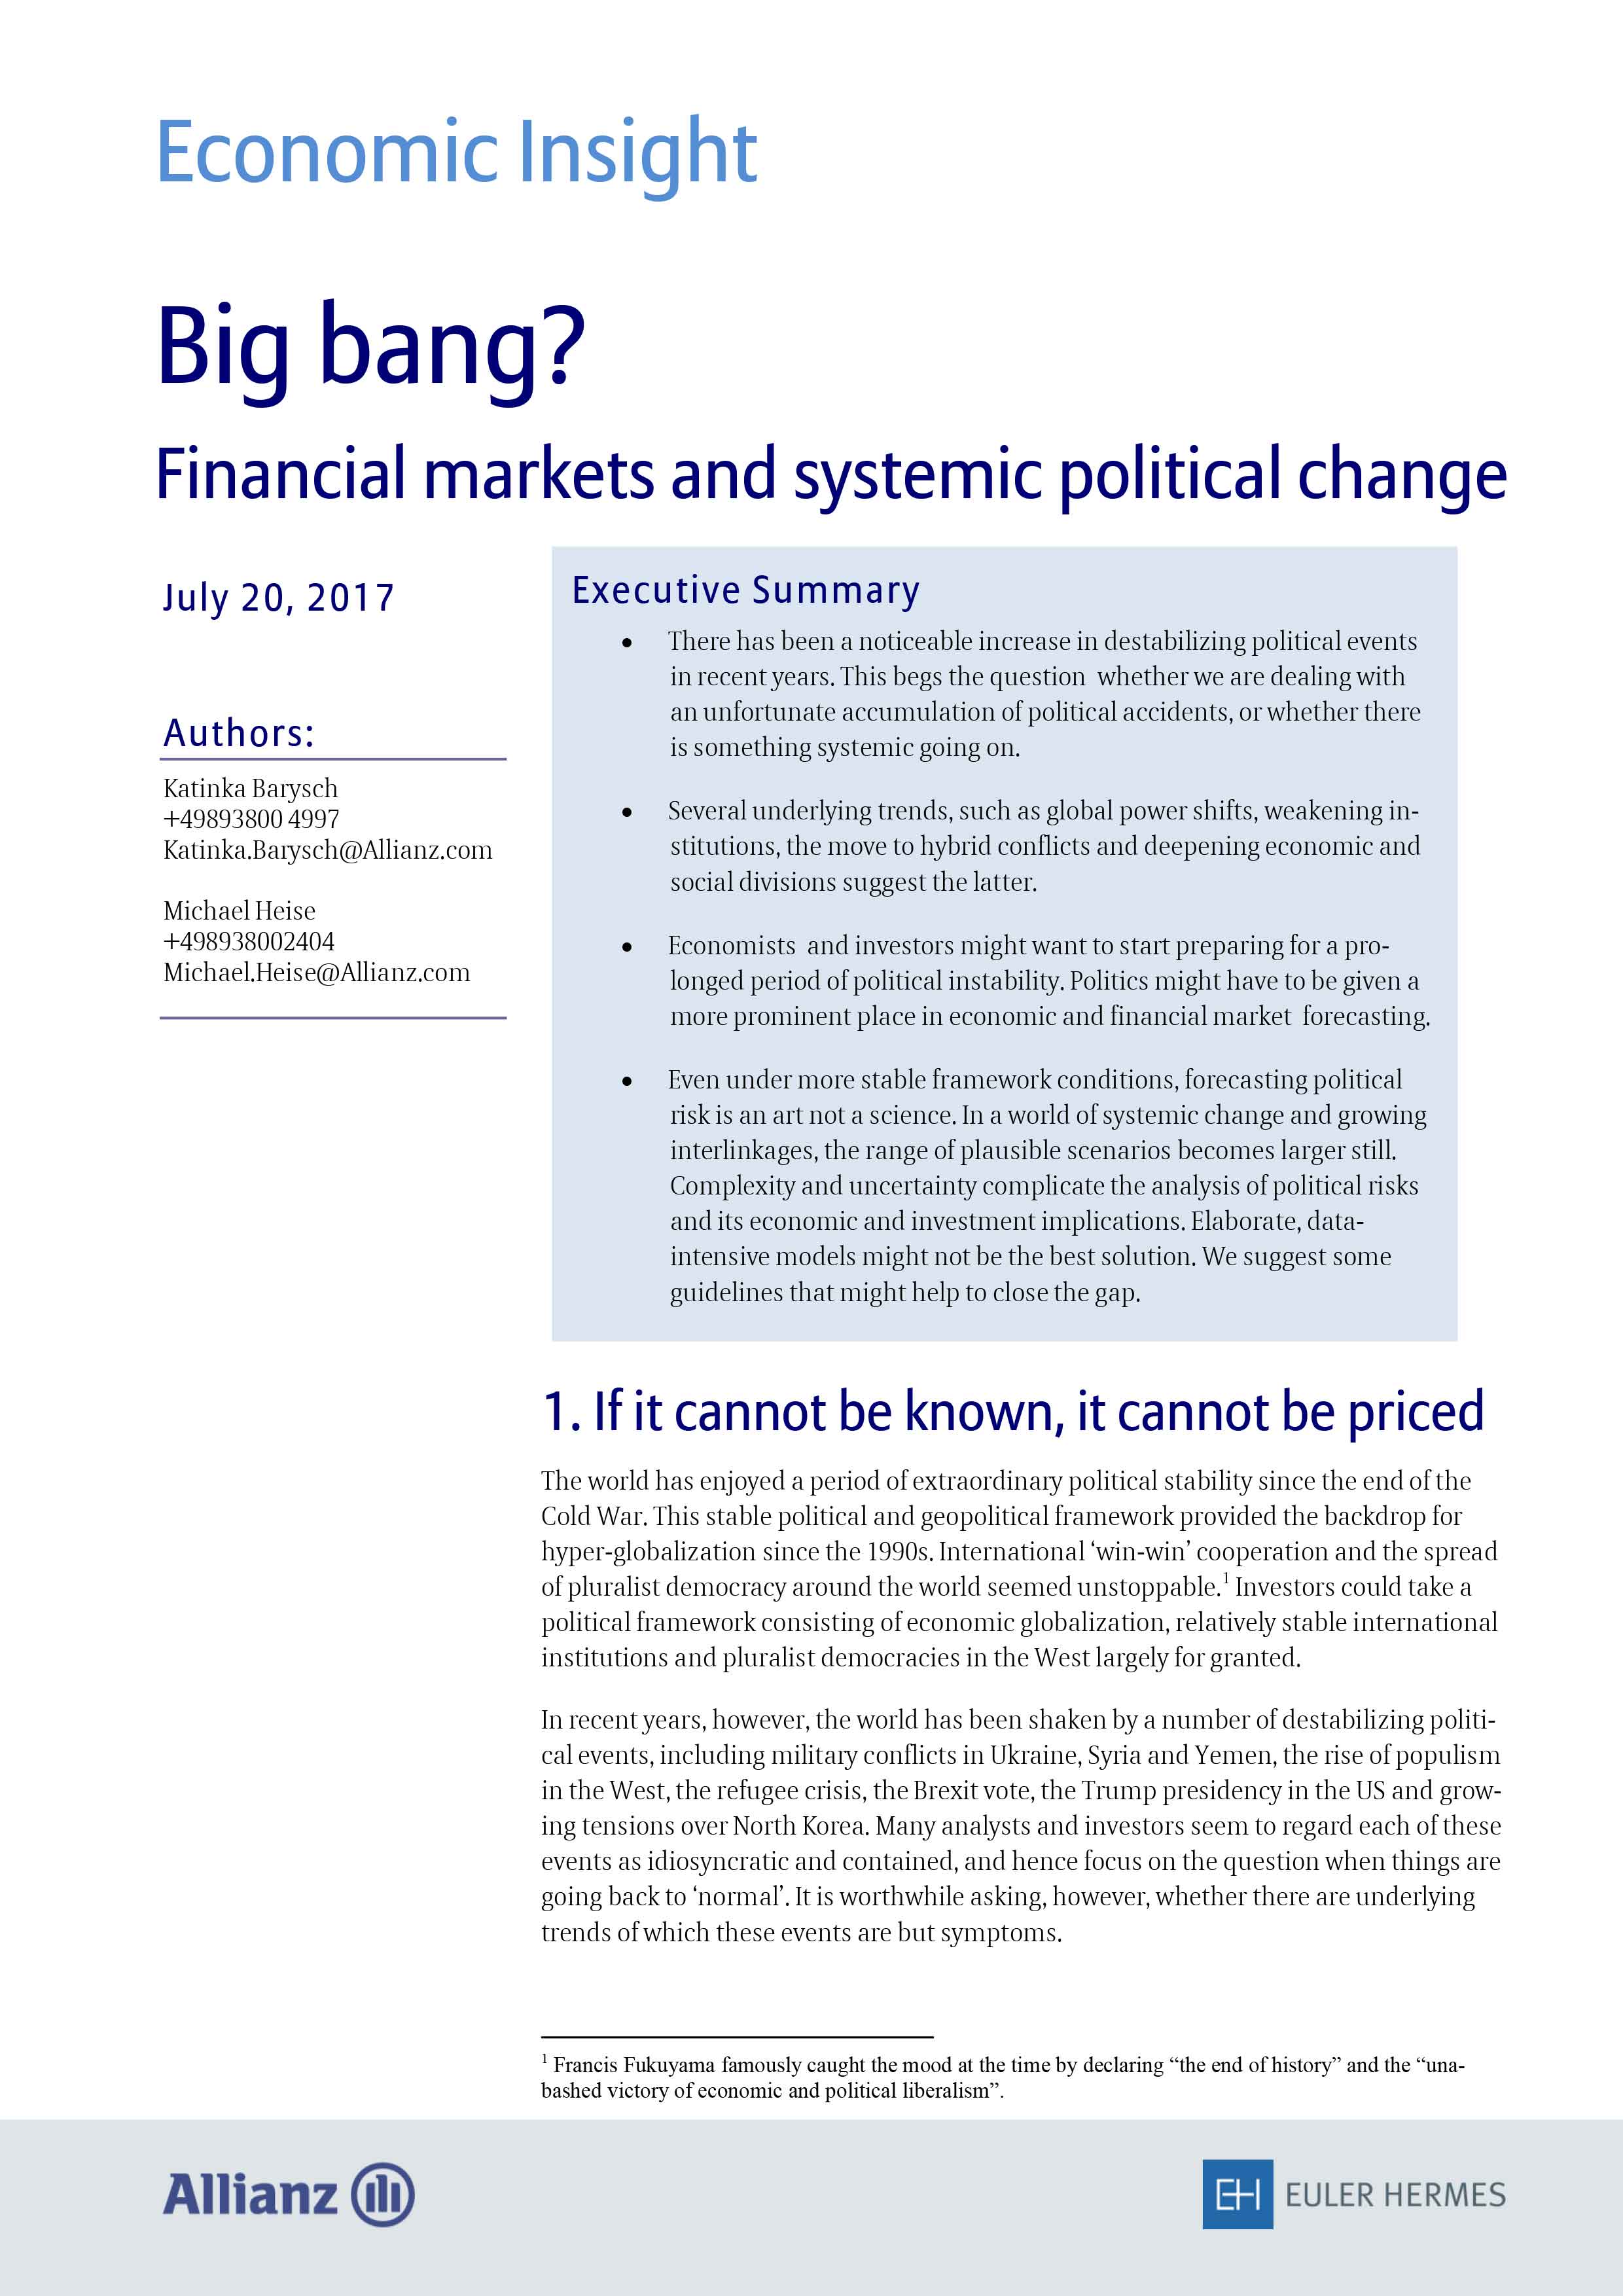 Big bang? Financial markets and systemic political change